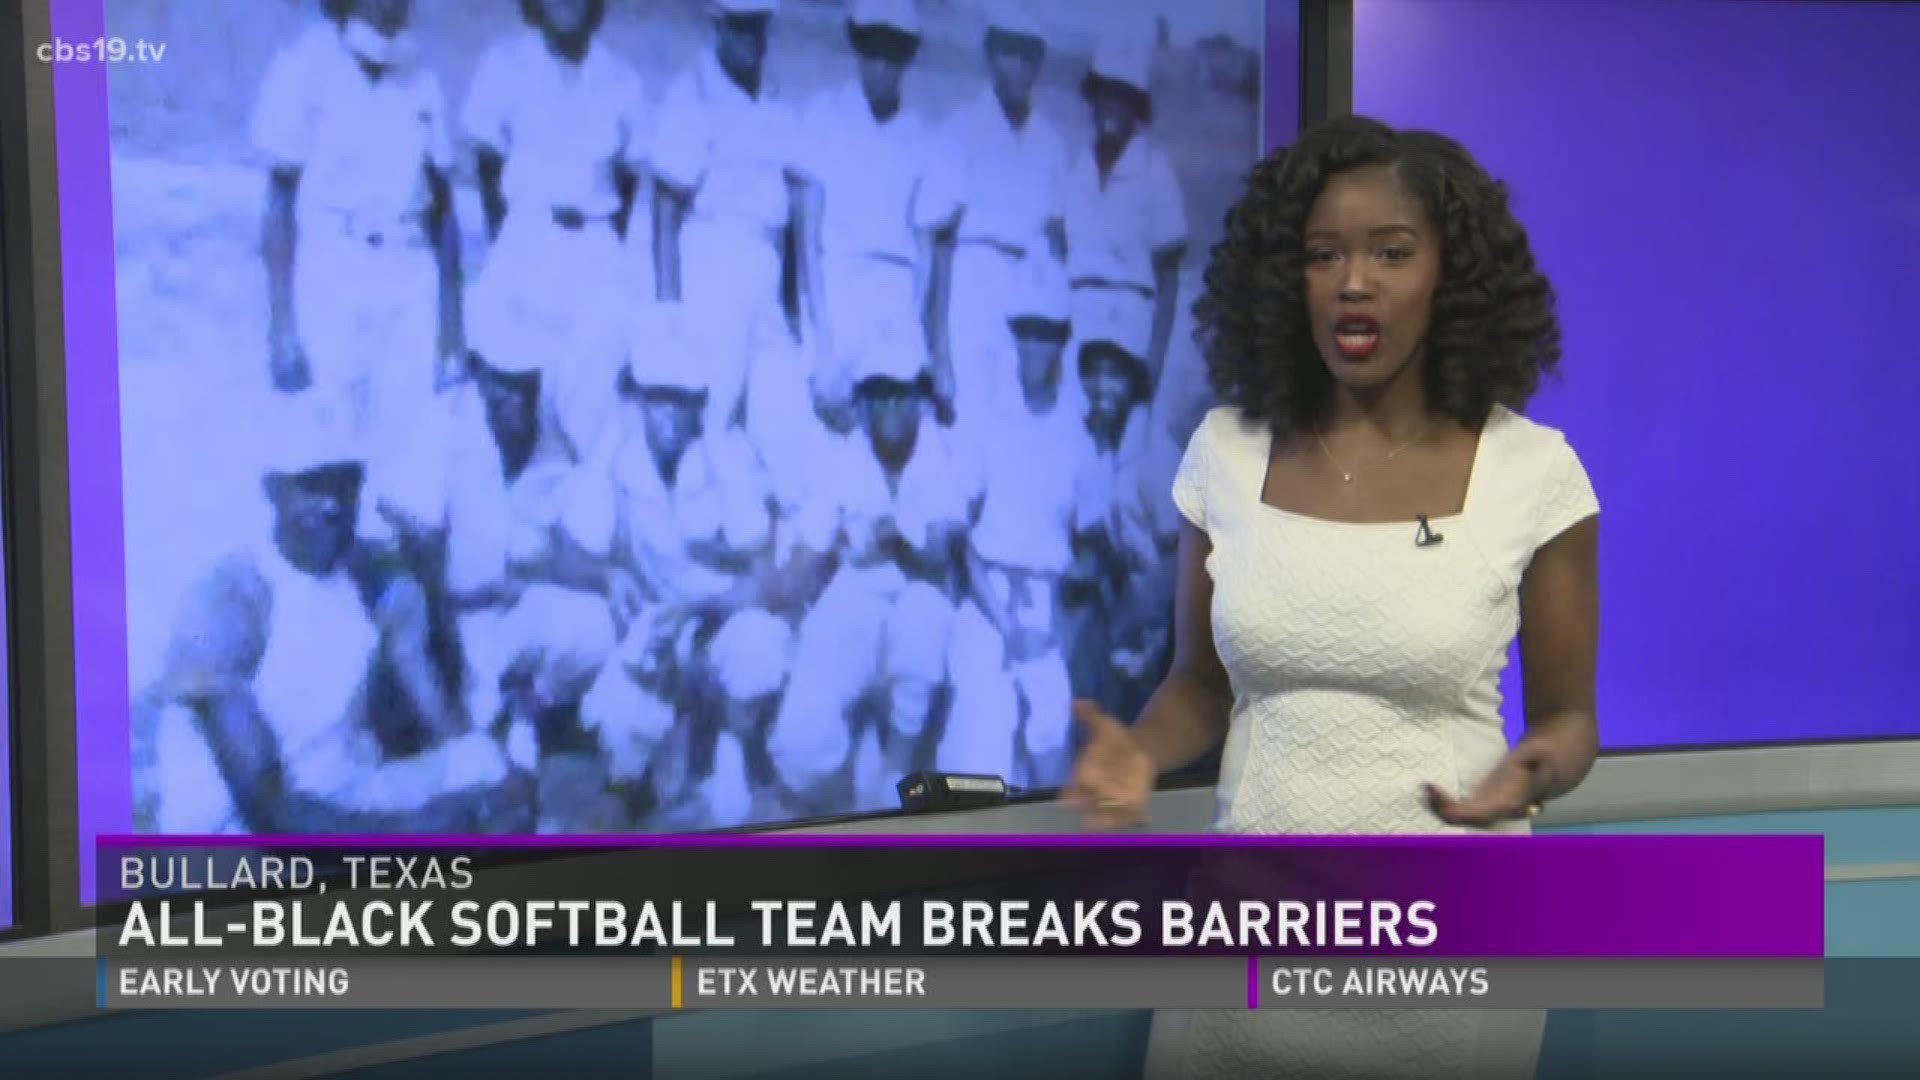 The Bullard Bumblebees was one of only a few all-black female softball teams at the height of segregation.